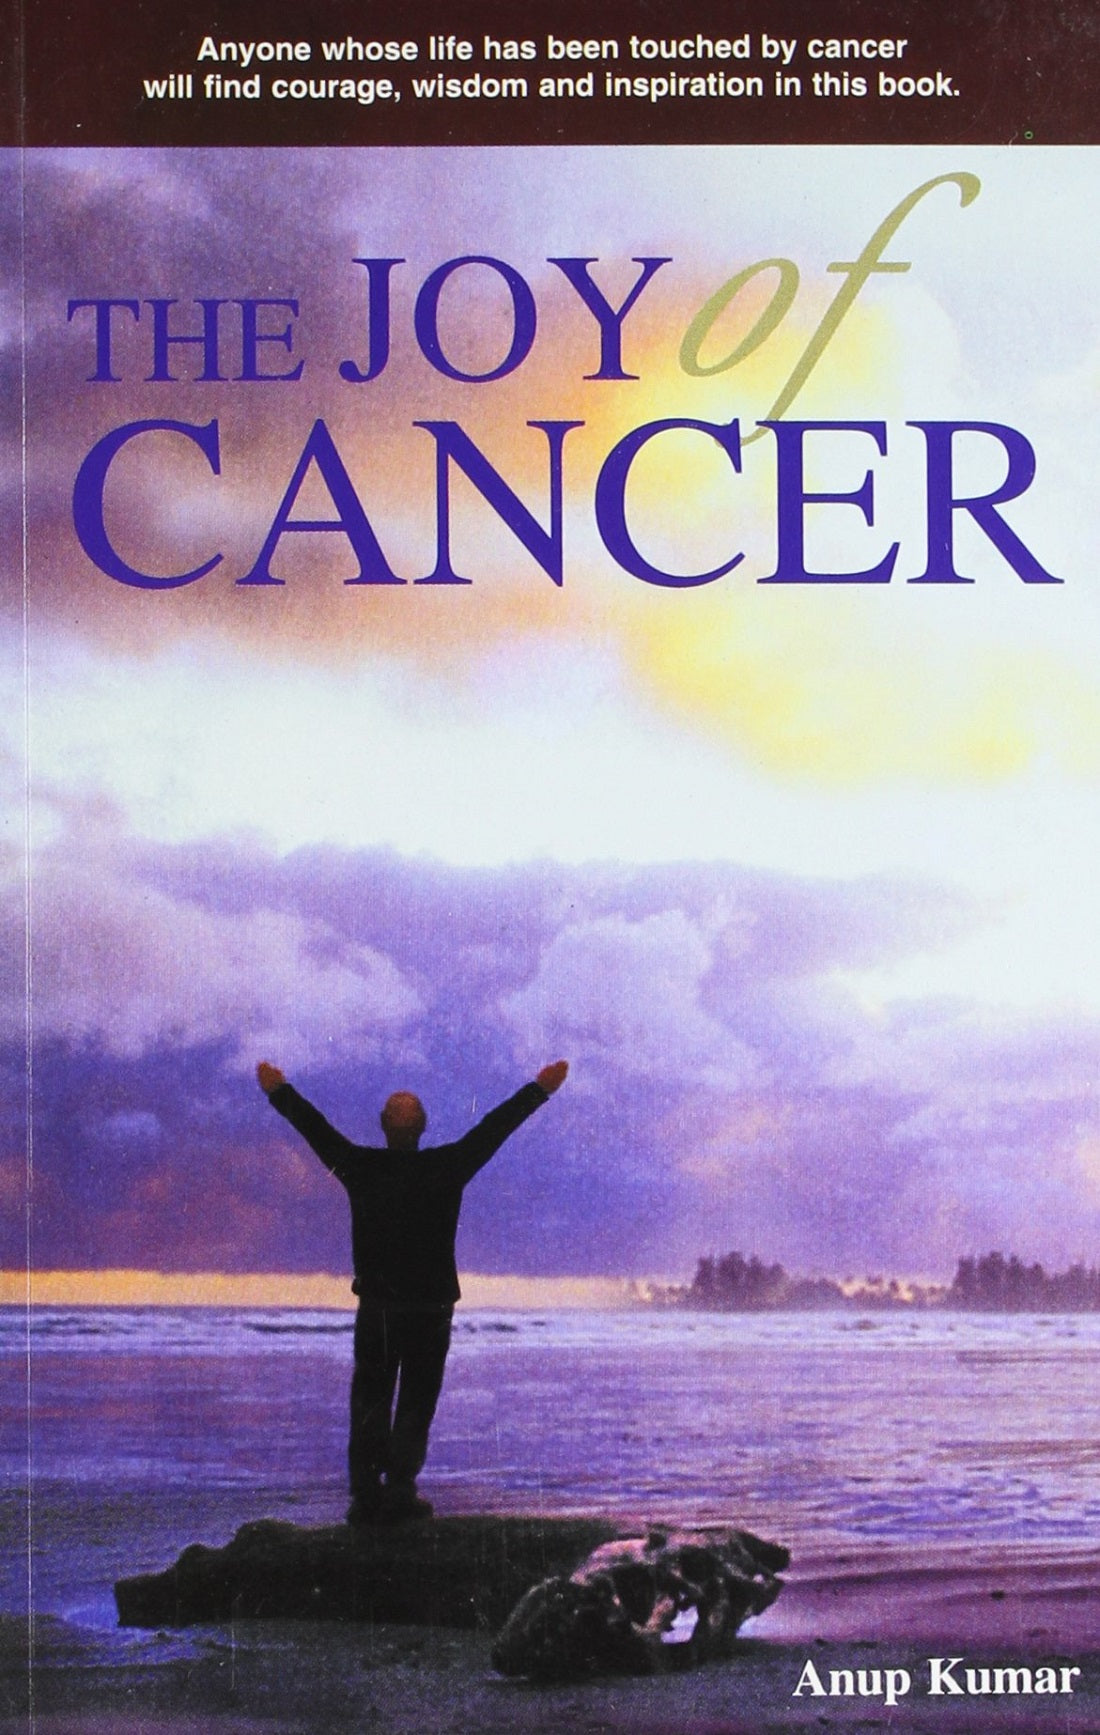 THE JOY OF CANCER